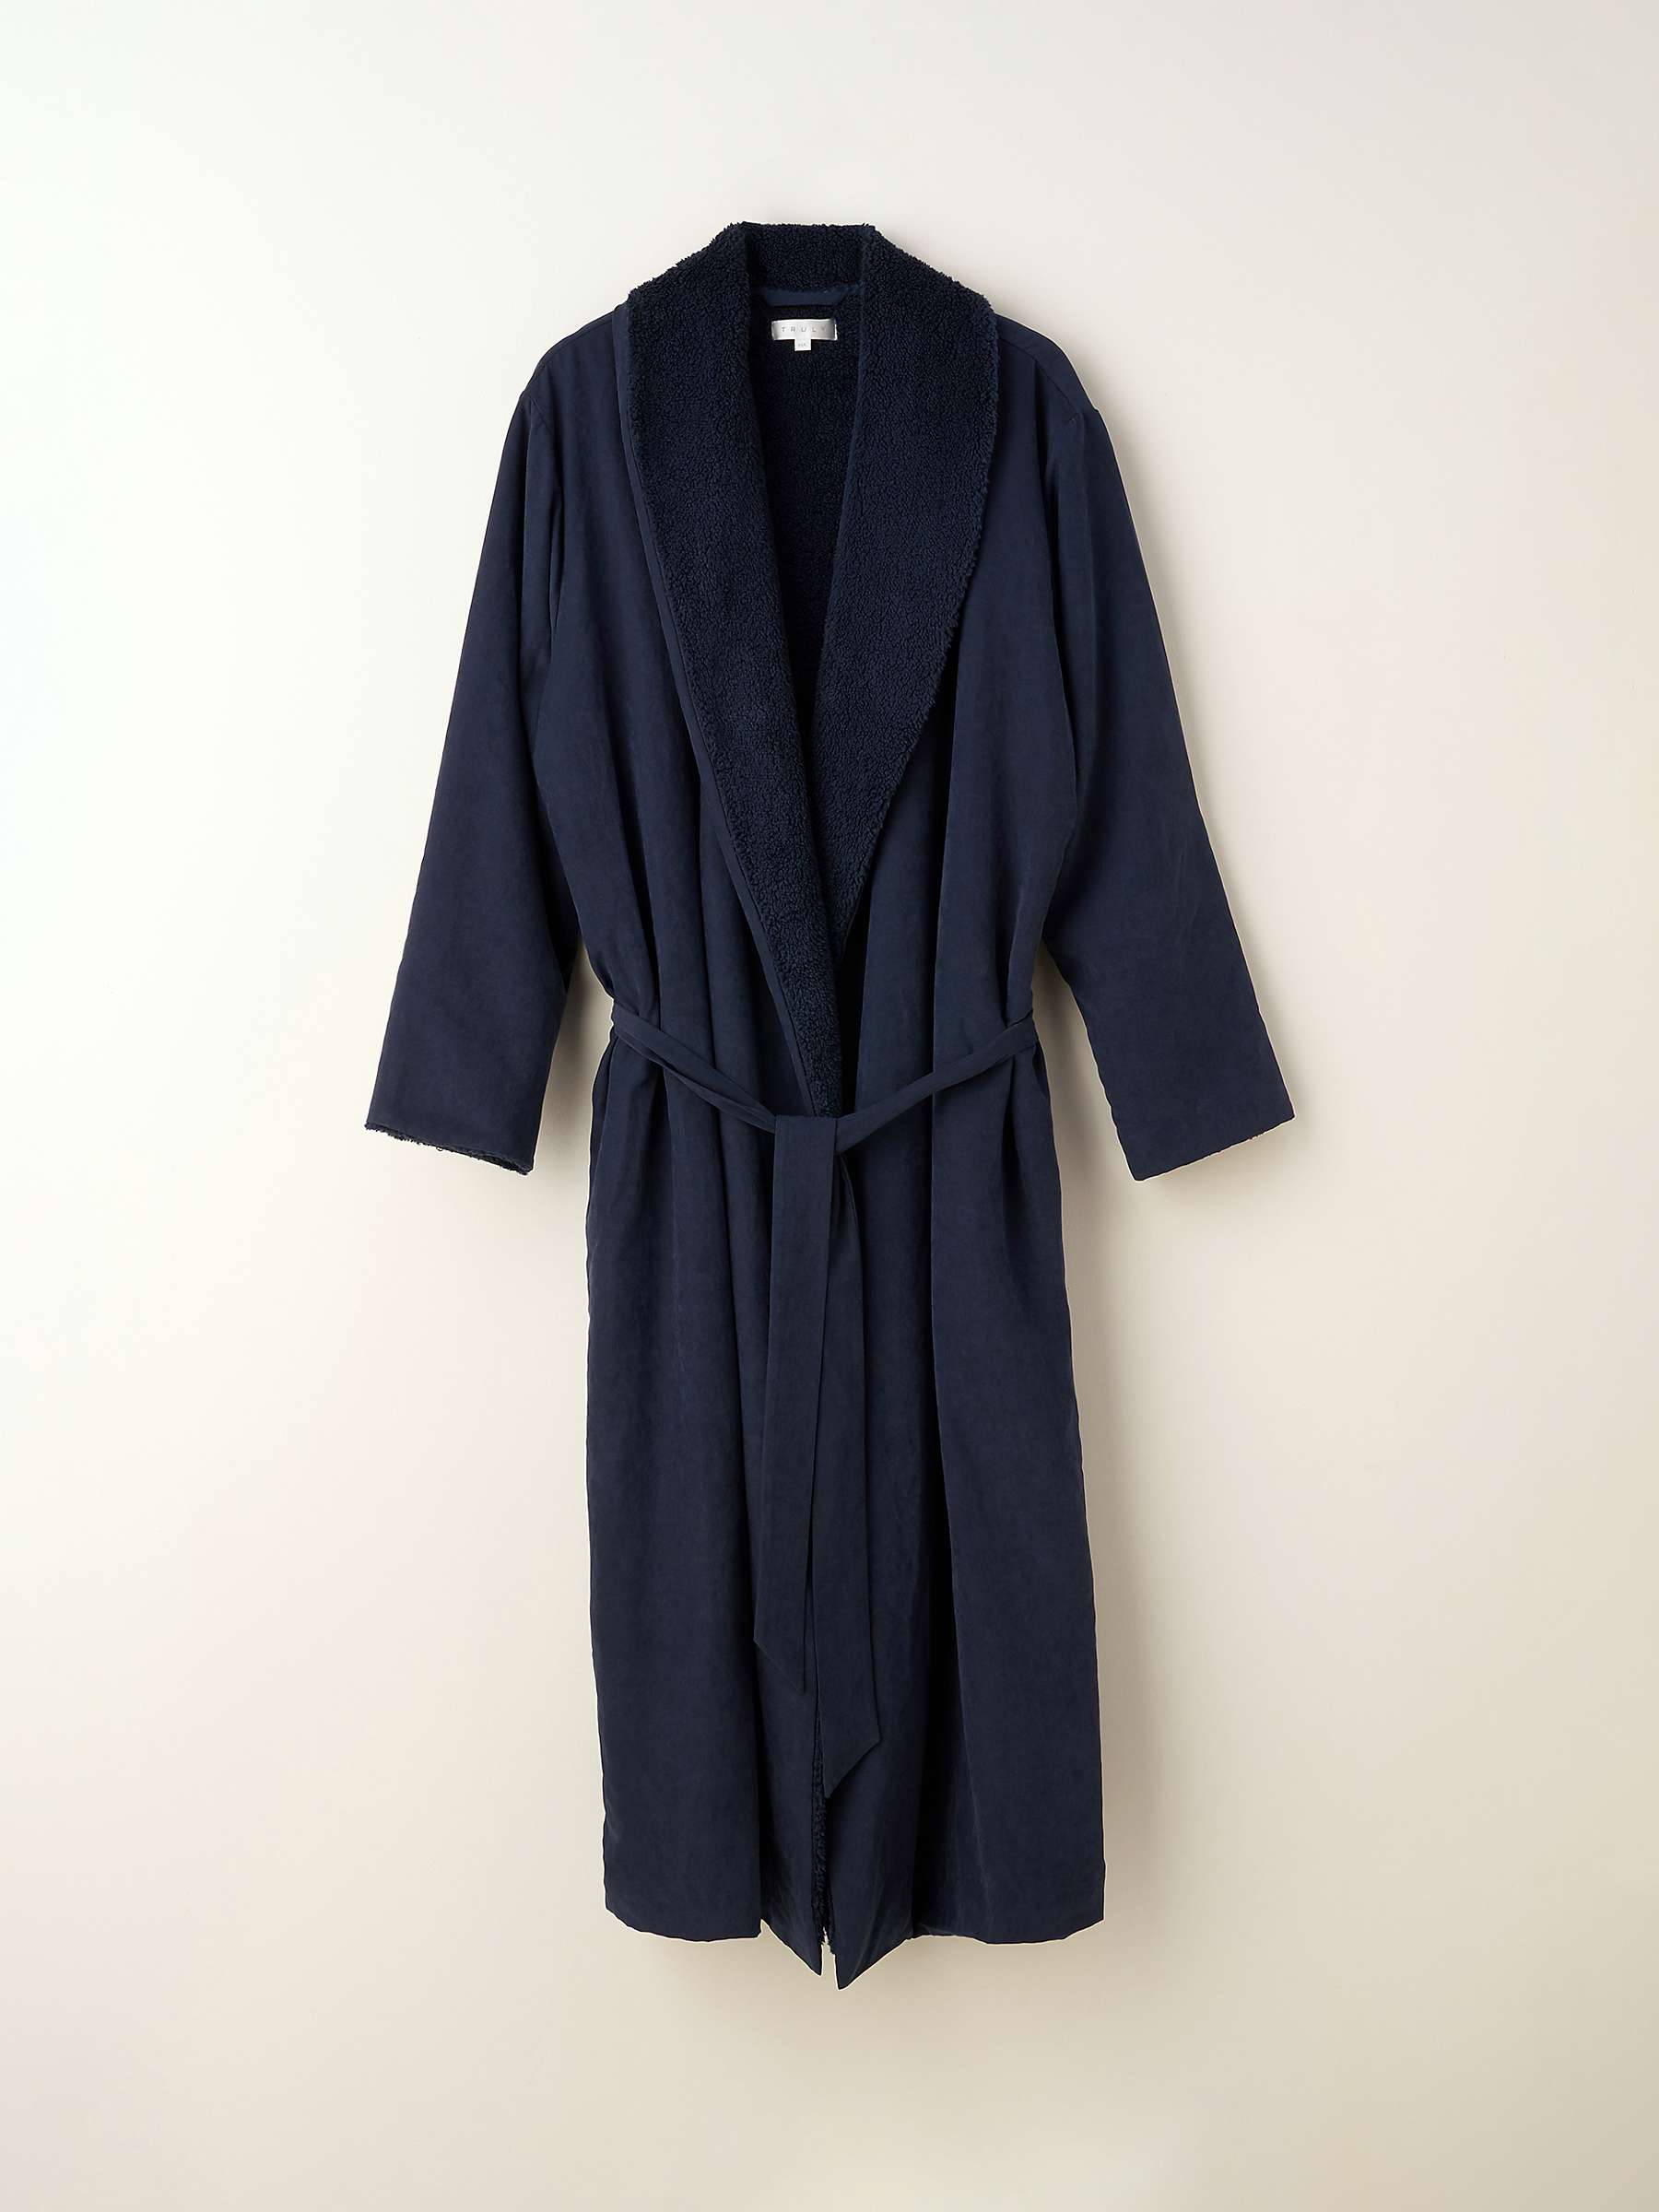 Buy Truly Fleece Lined Dressing Gown, Midnight Online at johnlewis.com